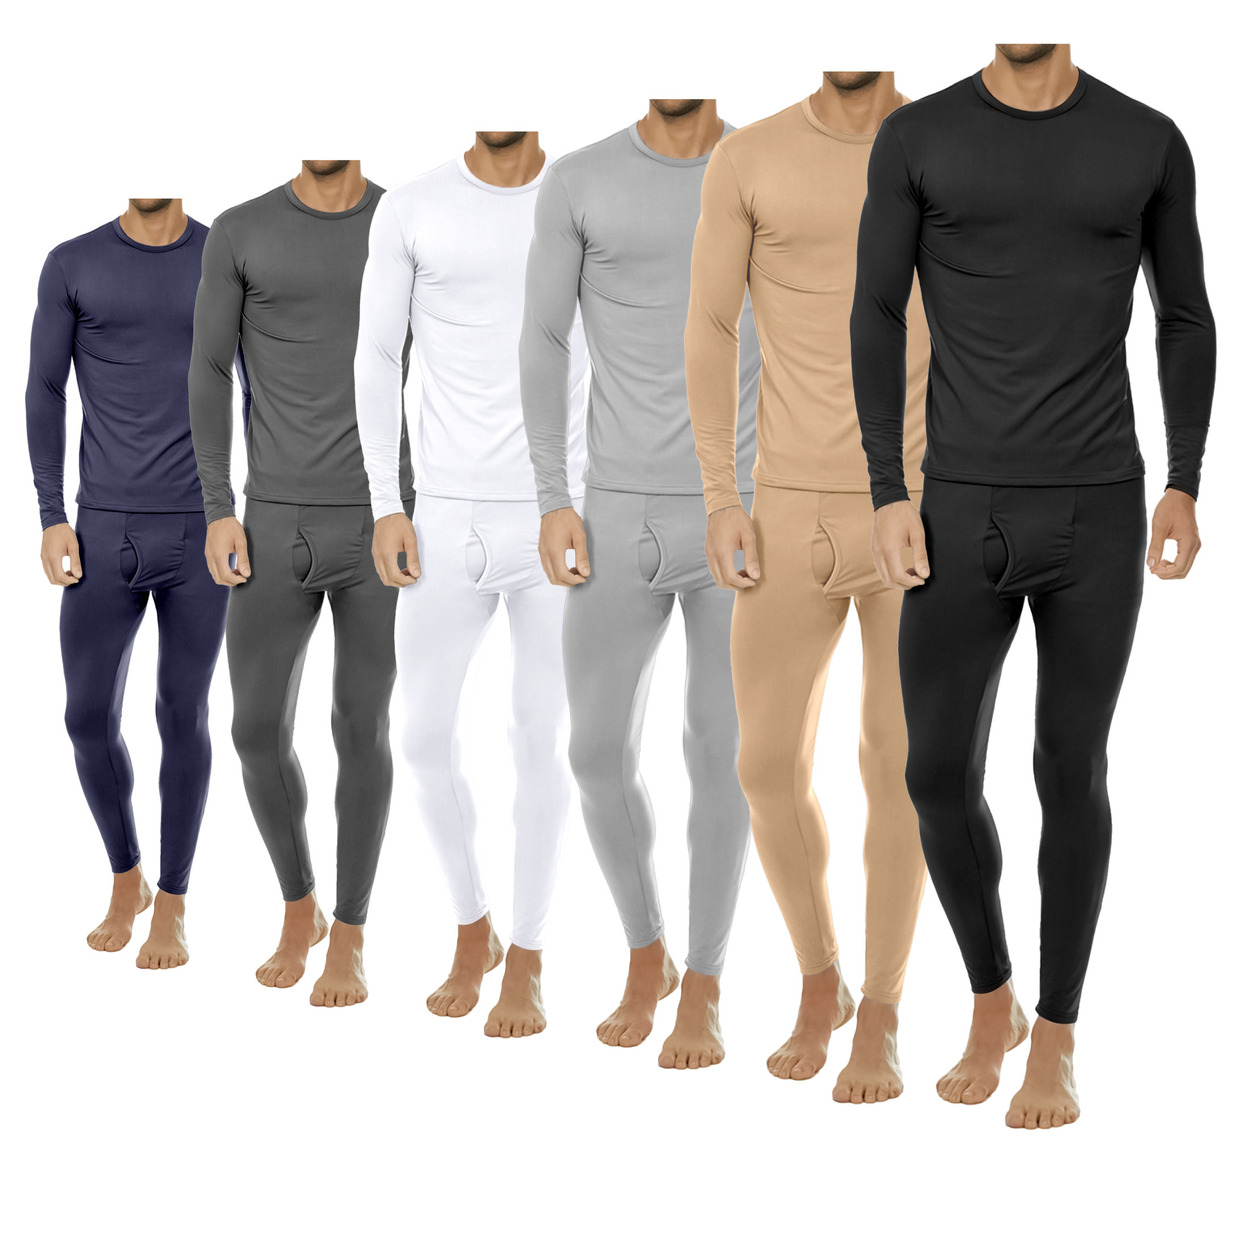 2-Sets: Men's Winter Warm Fleece Lined Thermal Underwear Set For Cold Weather - Black&white, X-large